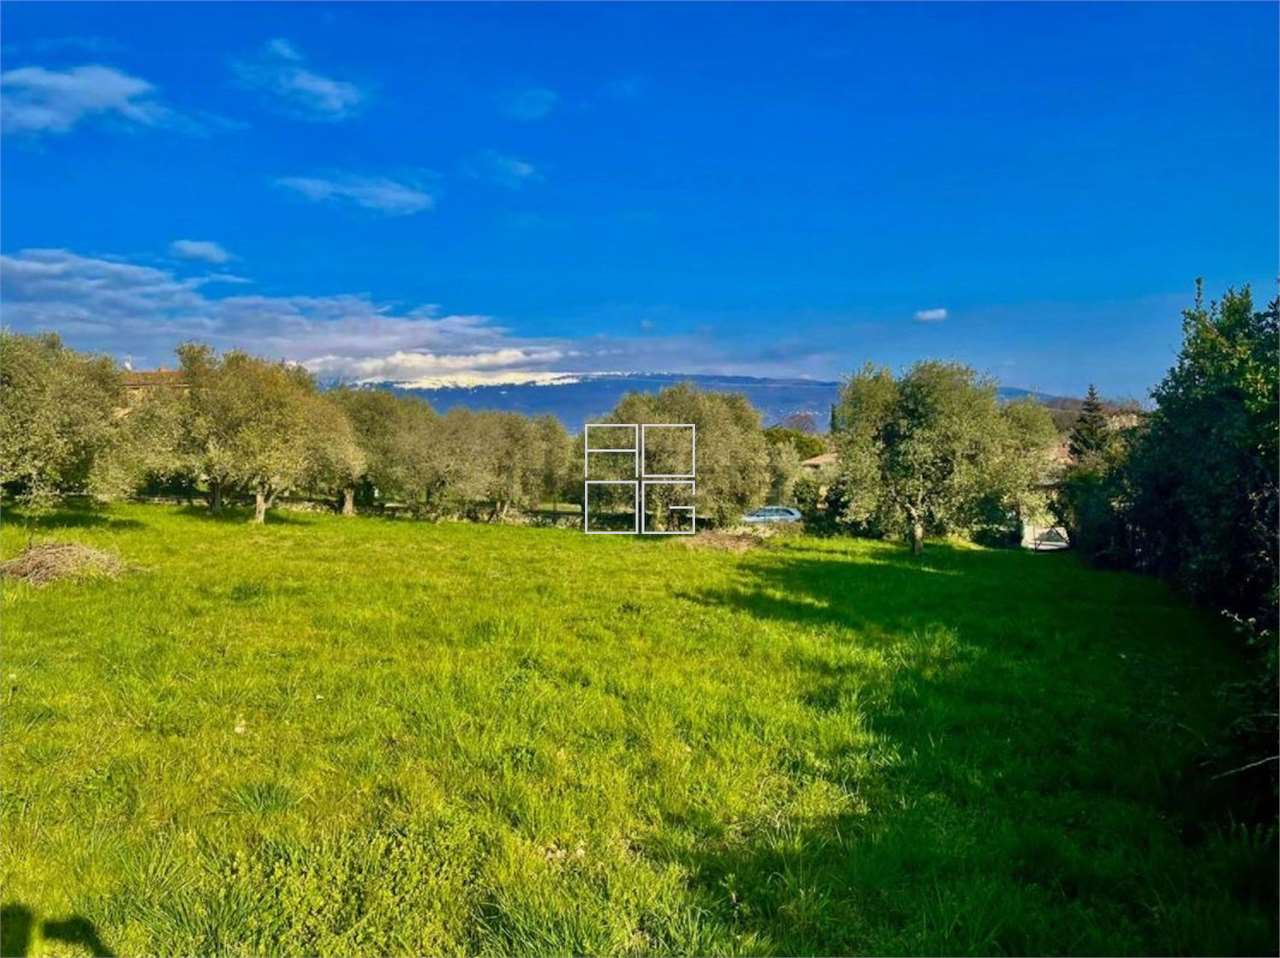 Building plot in hilly area in Toscolano Maderno